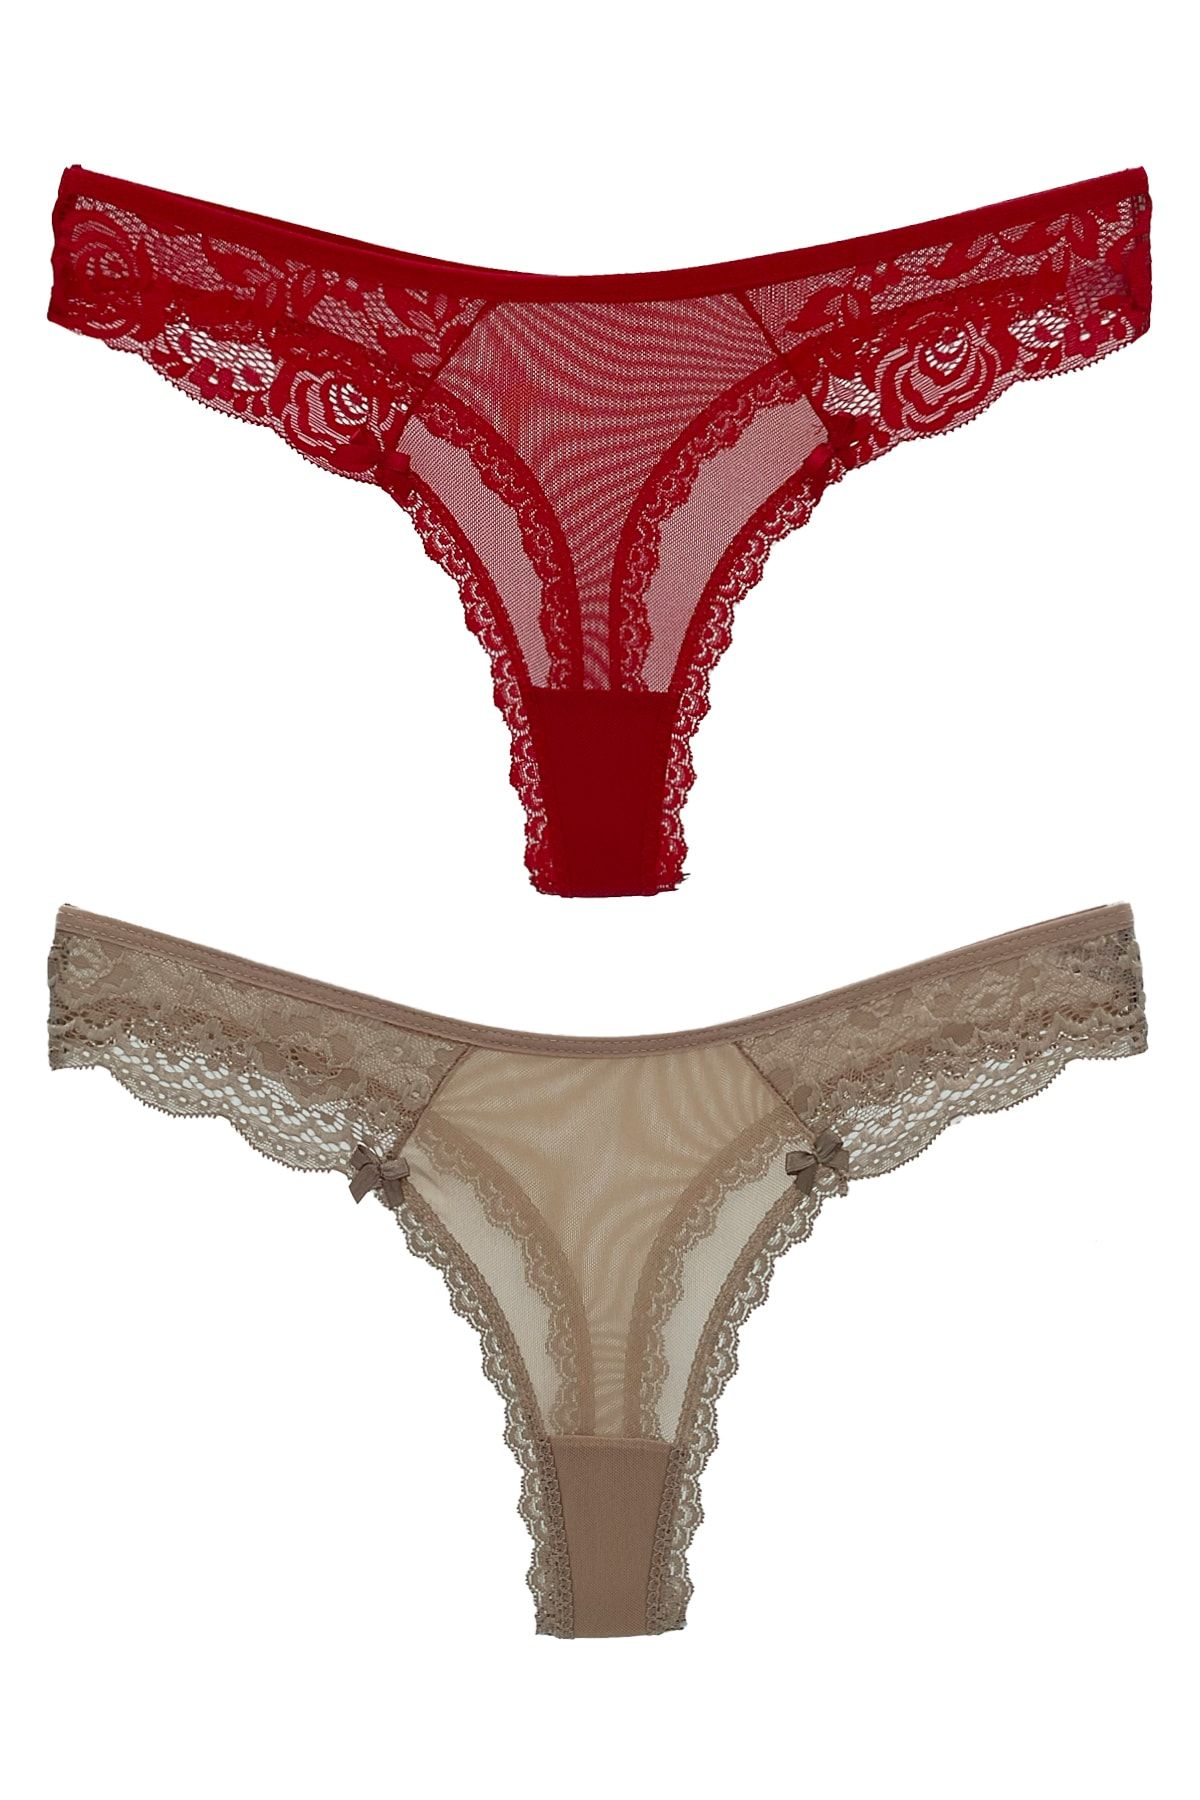 HNX 2-Piece String Women's Thong Panties with Tulle Lace Detail on